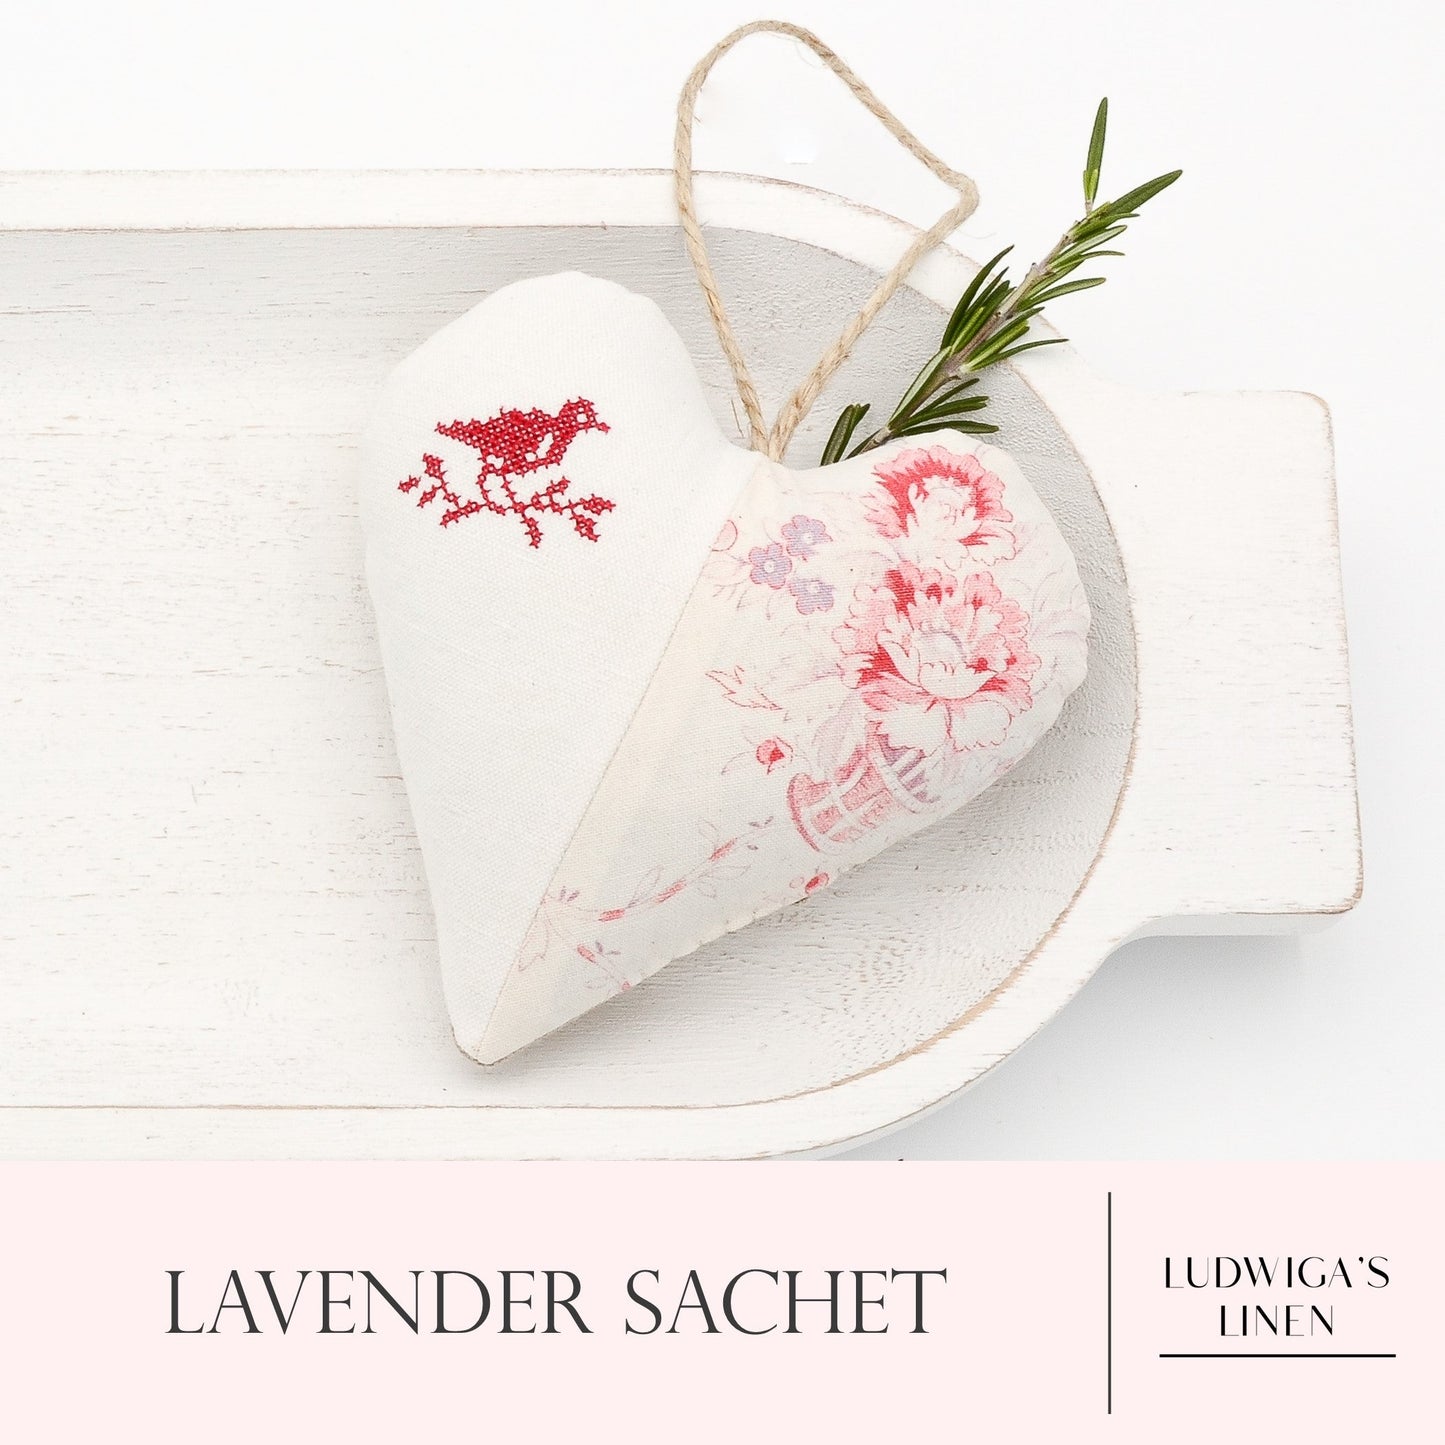 Antique/vintage French cotton and European white linen lavender sachet heart with red embroidered heart, hemp twine tie and filled with high quality lavender from Provence France